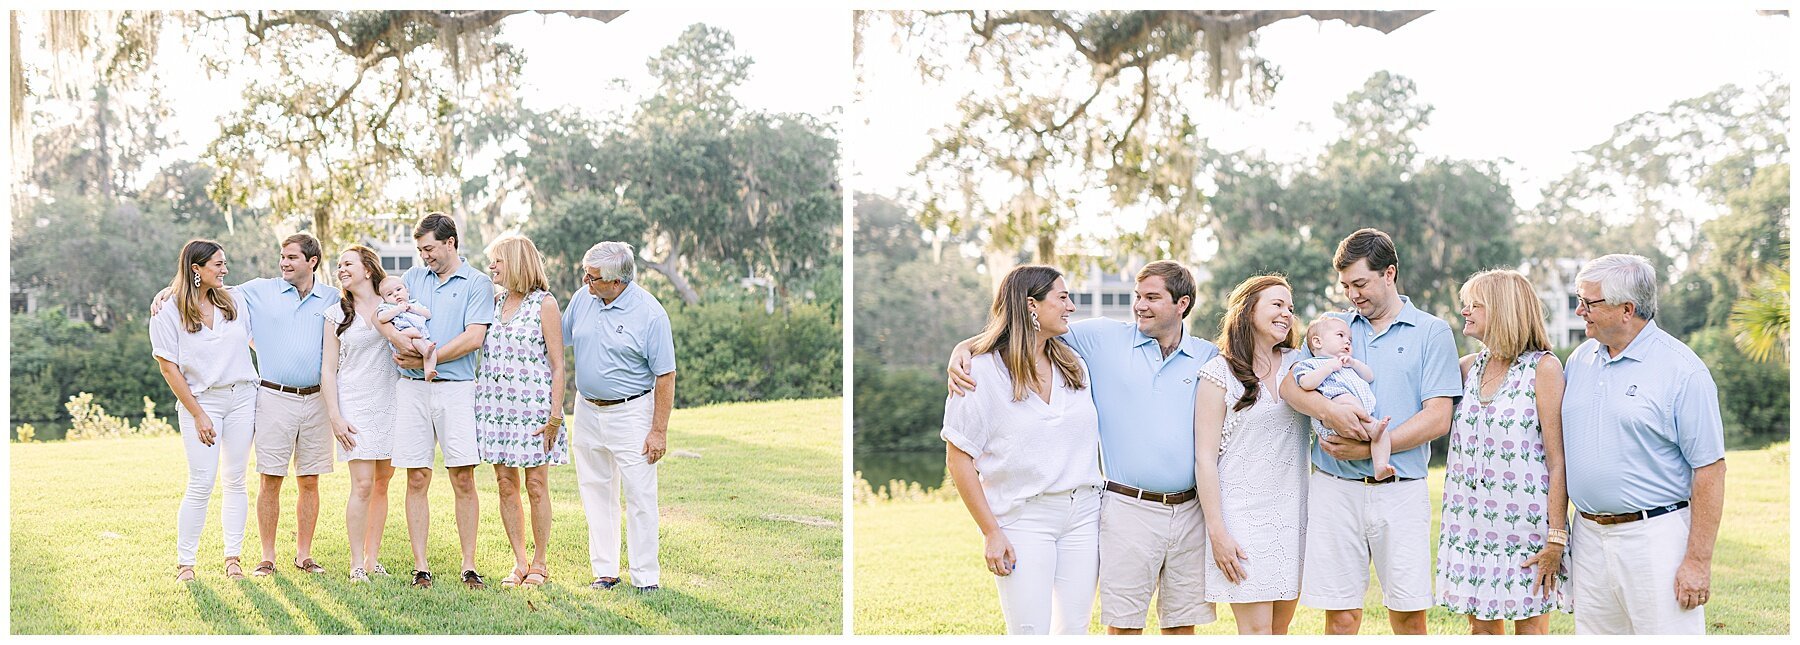 Katherine_Ives_Photography_Montage_Palmetto_Bluff_Oden_Family_5.jpg